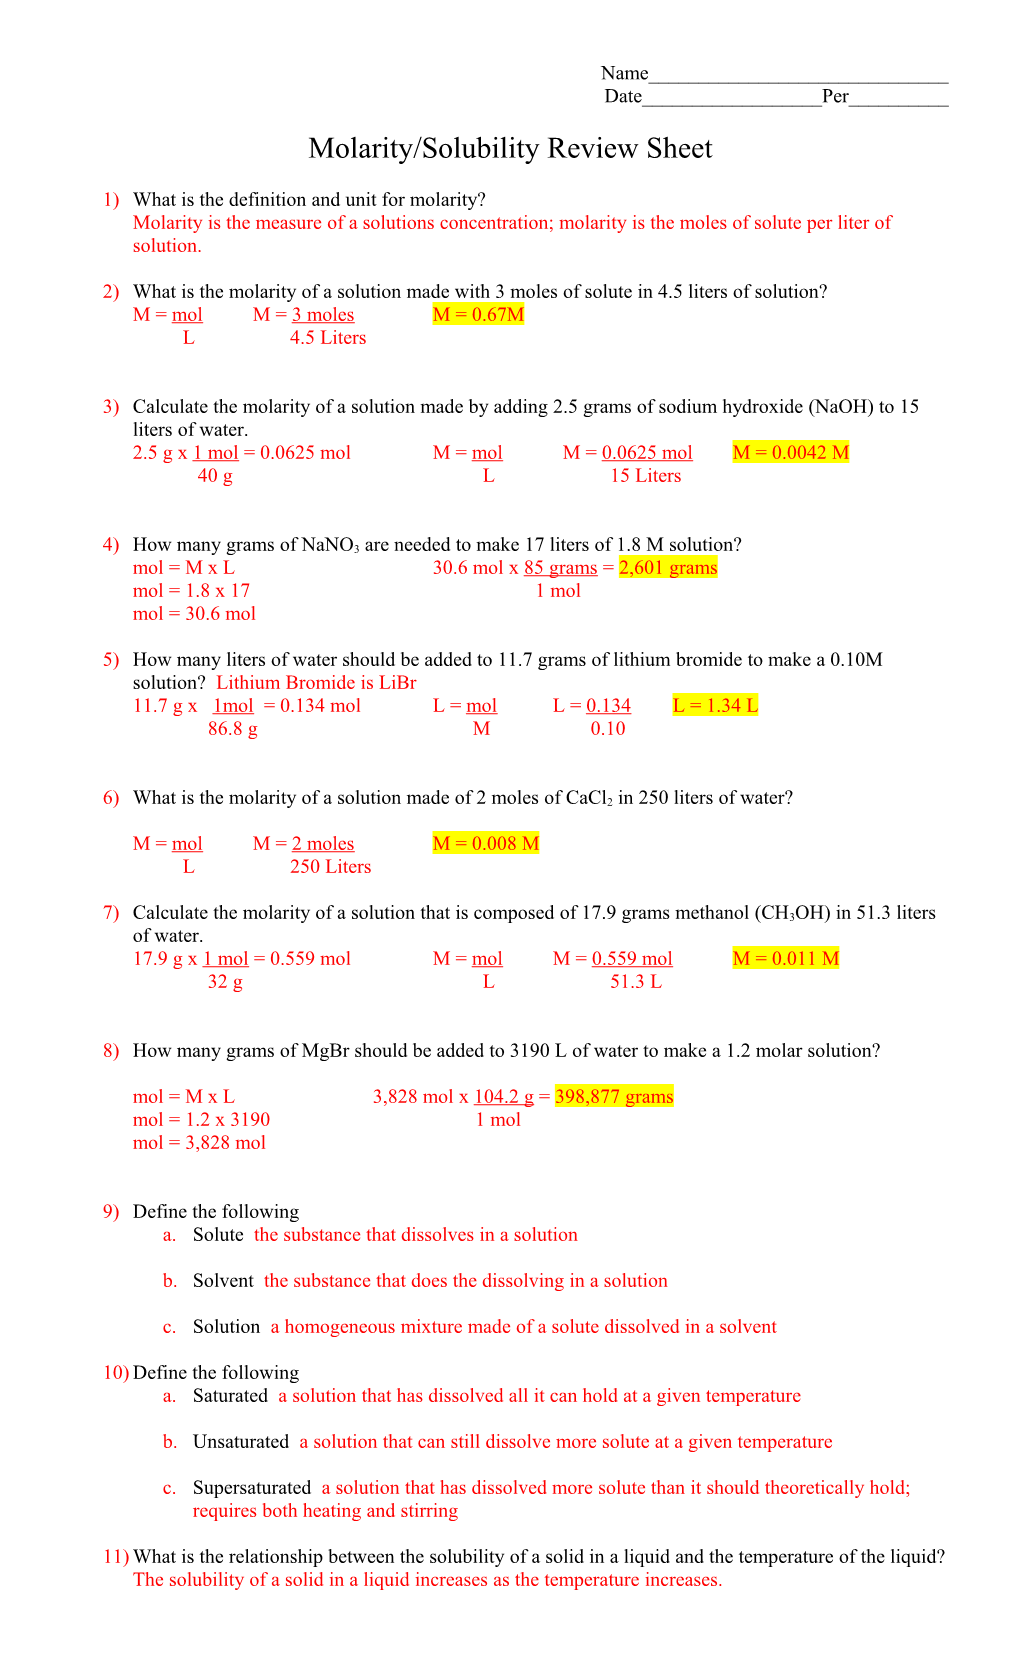 Molarity/Solubility Review Sheet